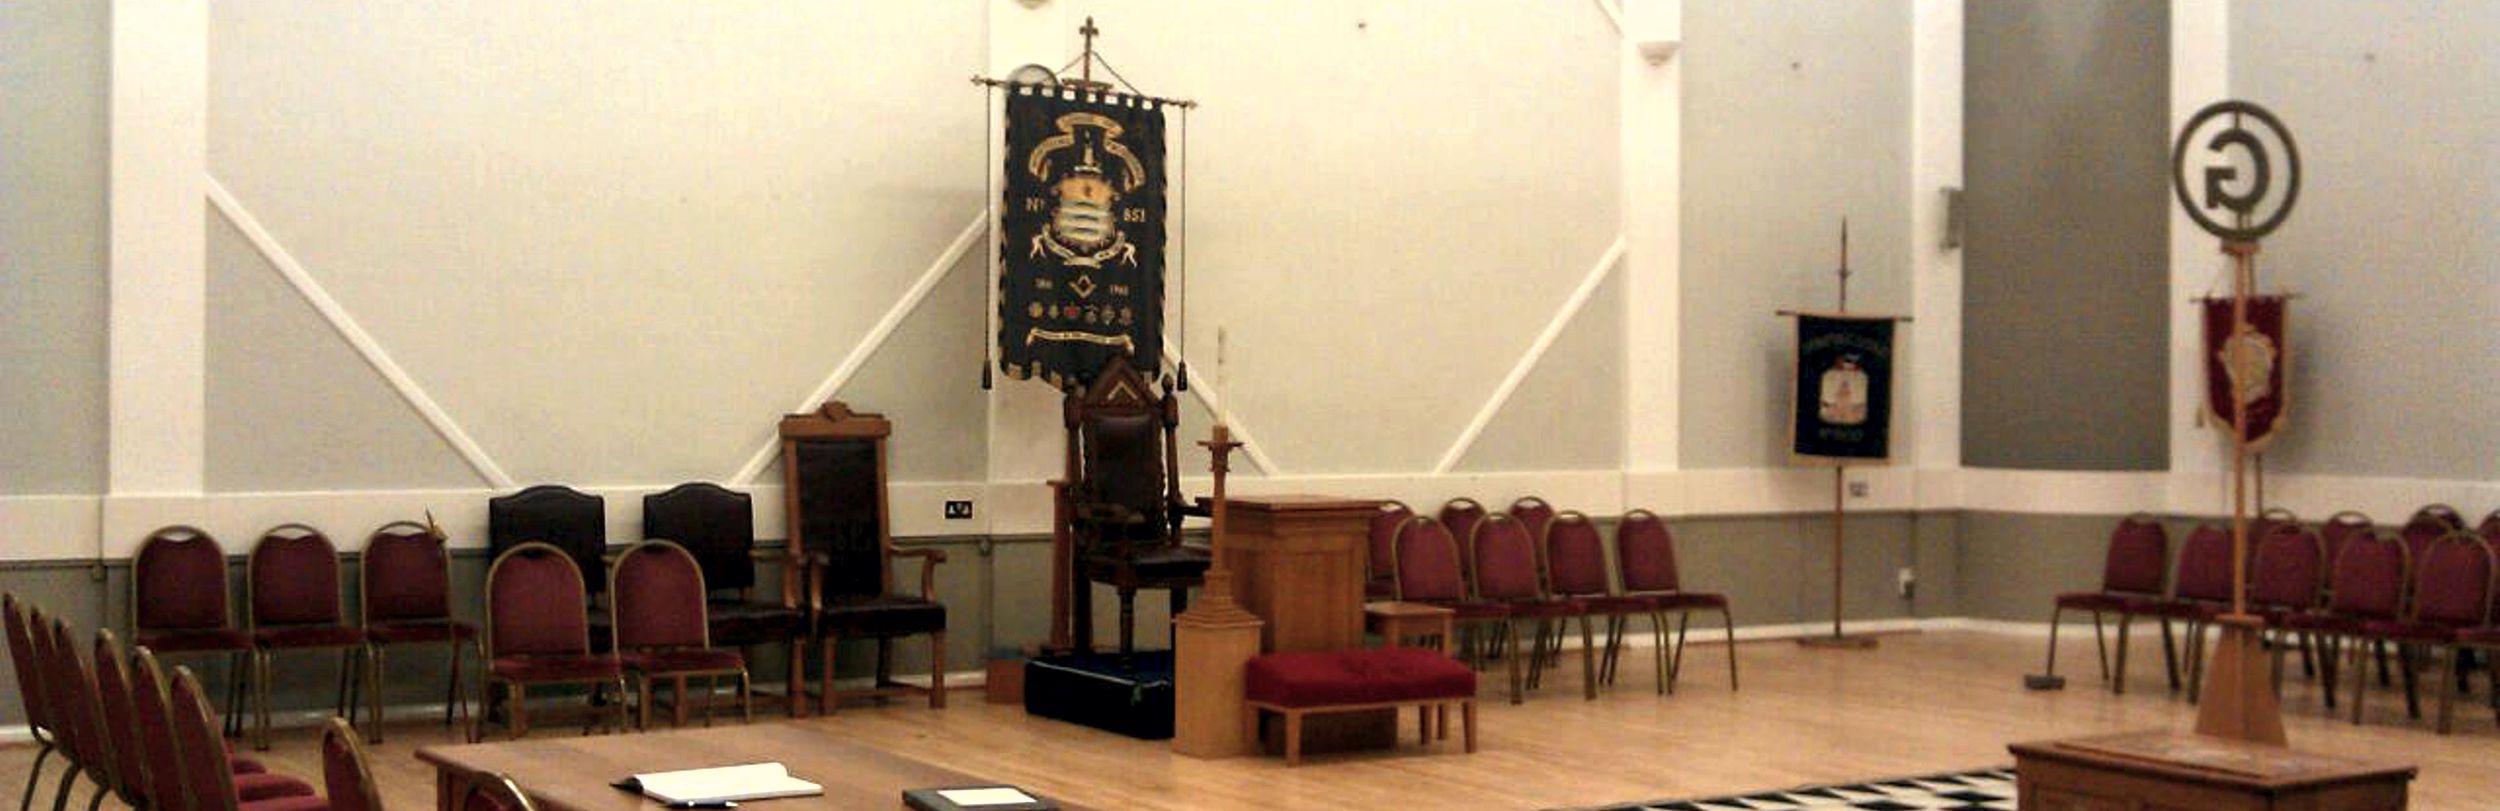 We are a Masonic Lodge based at the Charmandean Centre in Worthing, West Sussex. SOMPTING MASONIC LODGE